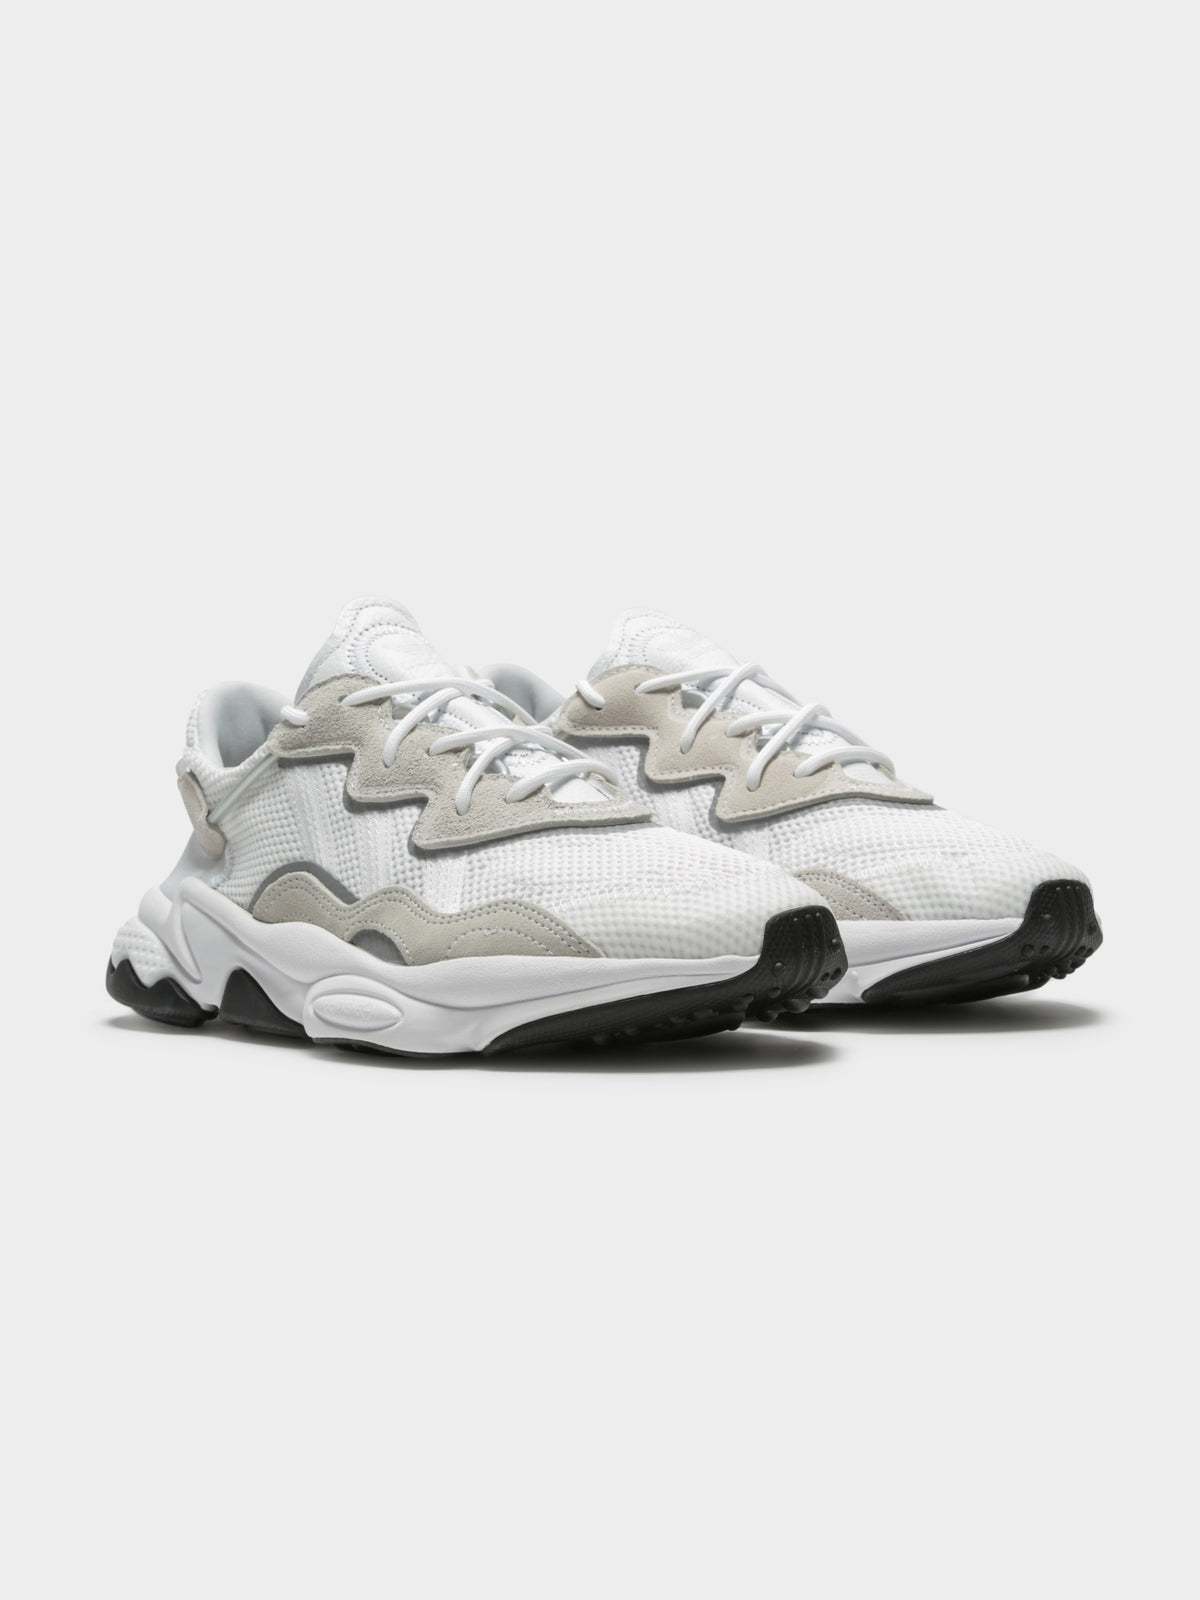 Unisex Ozweego Sneakers in Cloud White